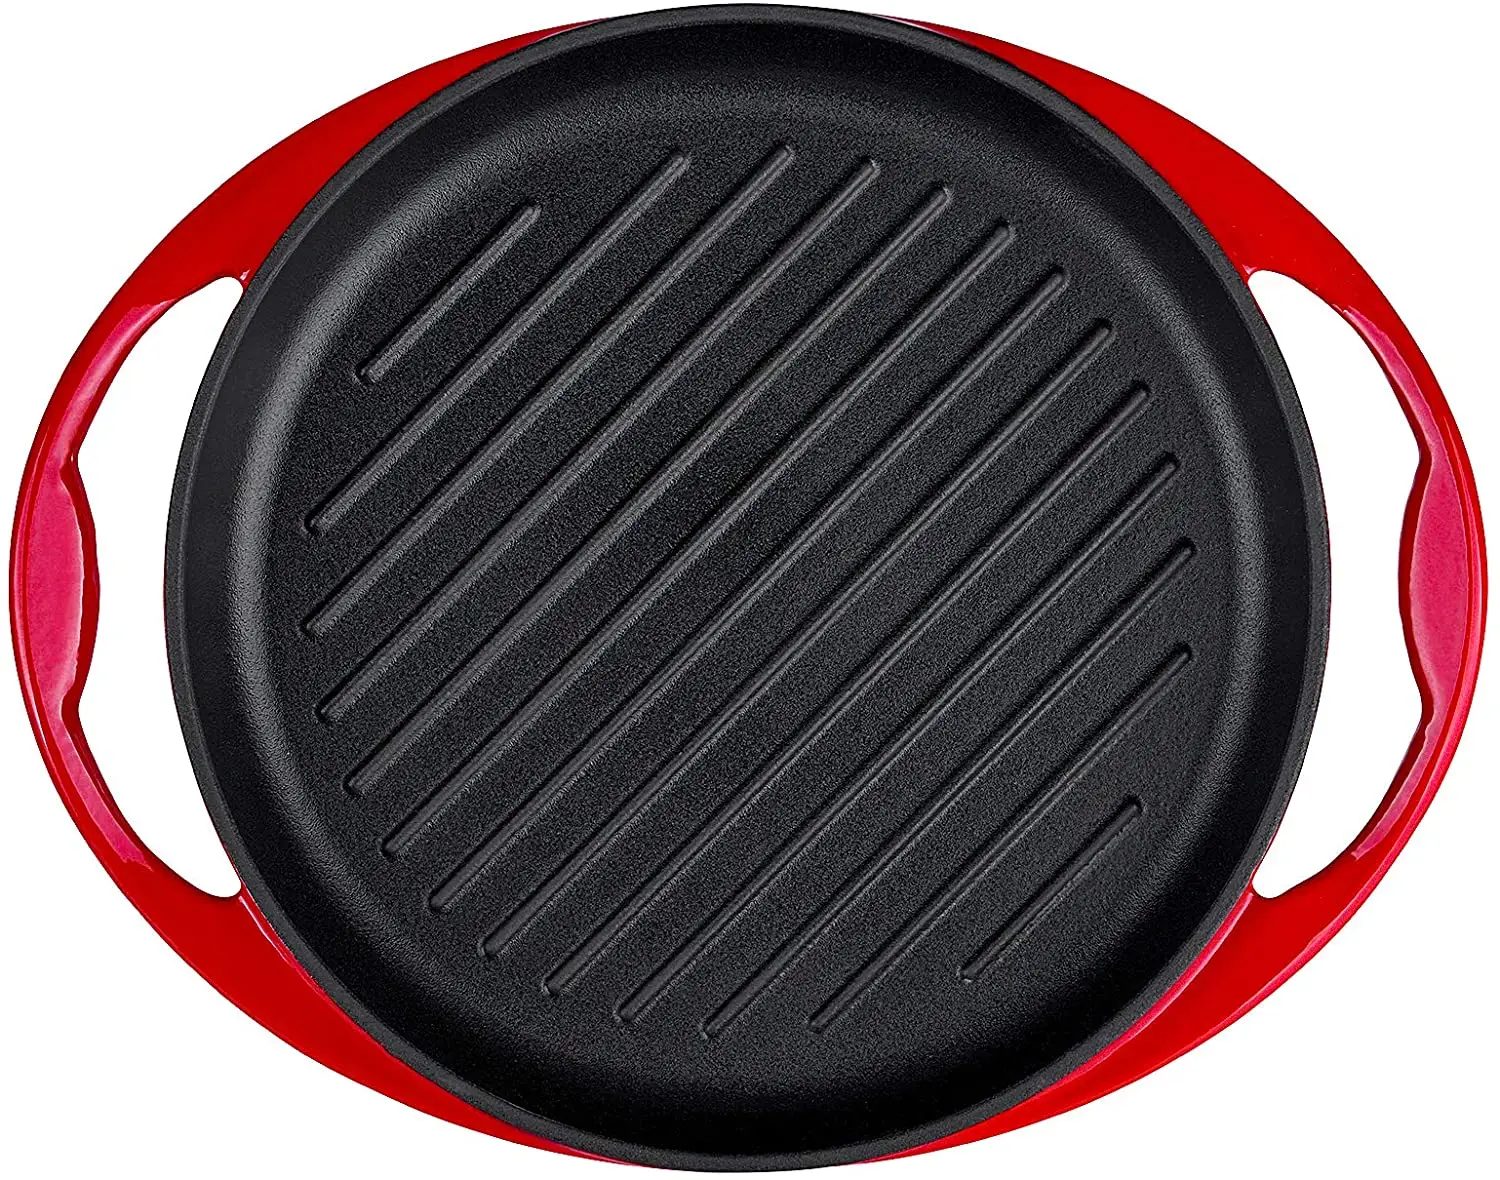 High Quality Scarlet Red 10 Inch Round Enameled Heavy Duty Cast Iron Grill Pan mit Double Handles